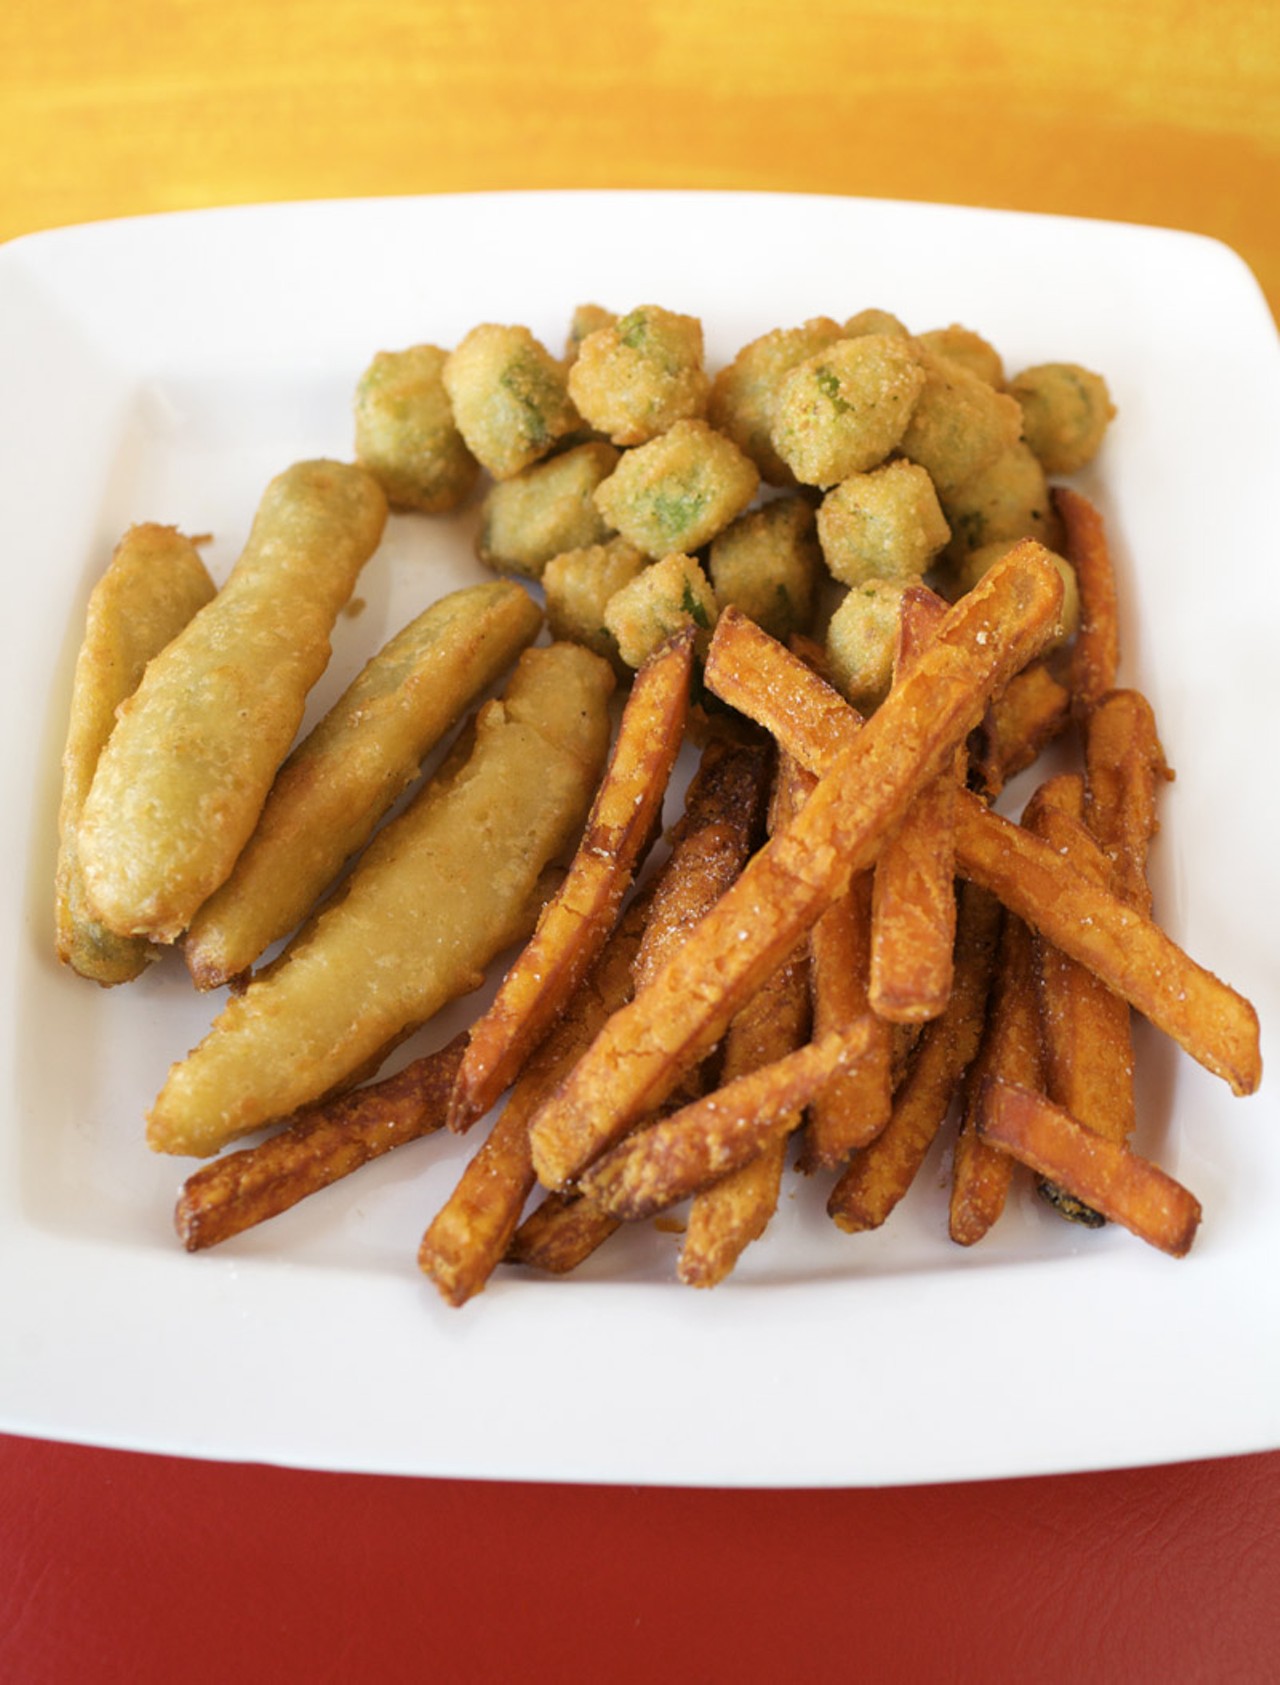 You have your choice of sides at O! Wing Plus, too. Here are three of the ones you might choose...sweet potato fries, fried pickle spears and fried okra.